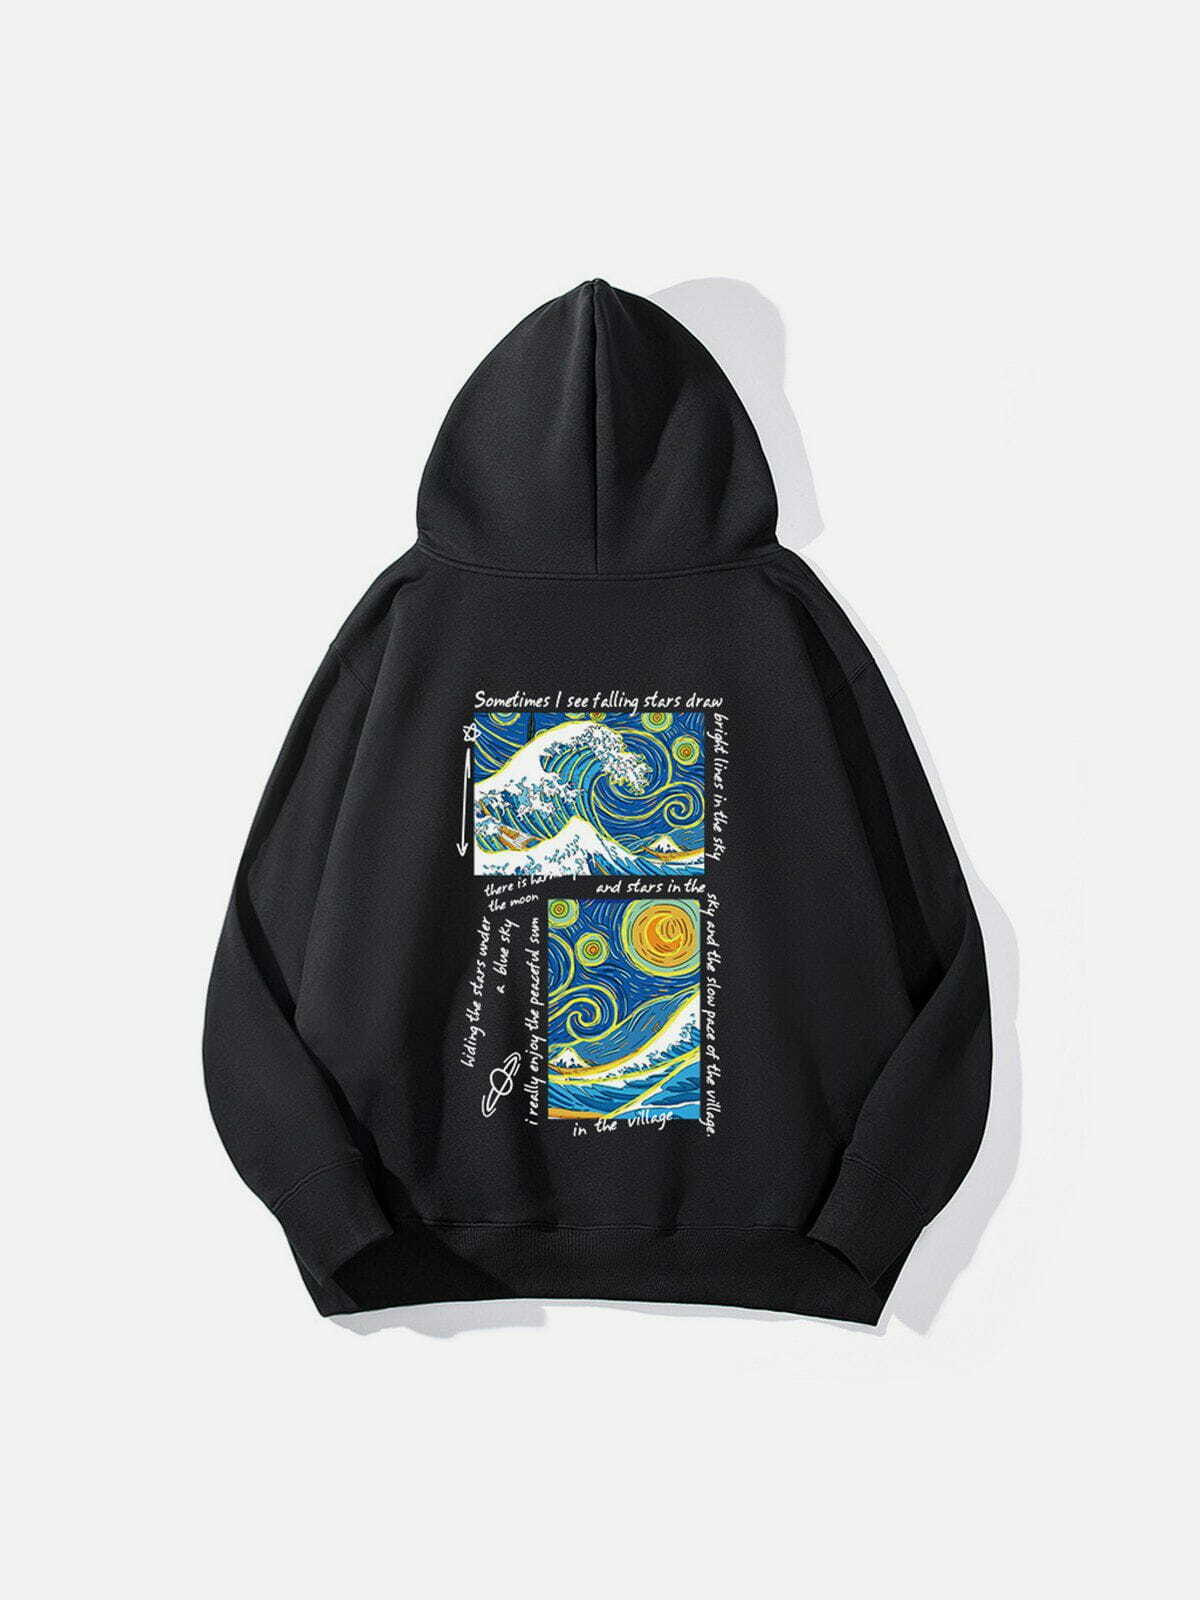 artistic oil painting hoodie thick & vibrant streetwear 5482